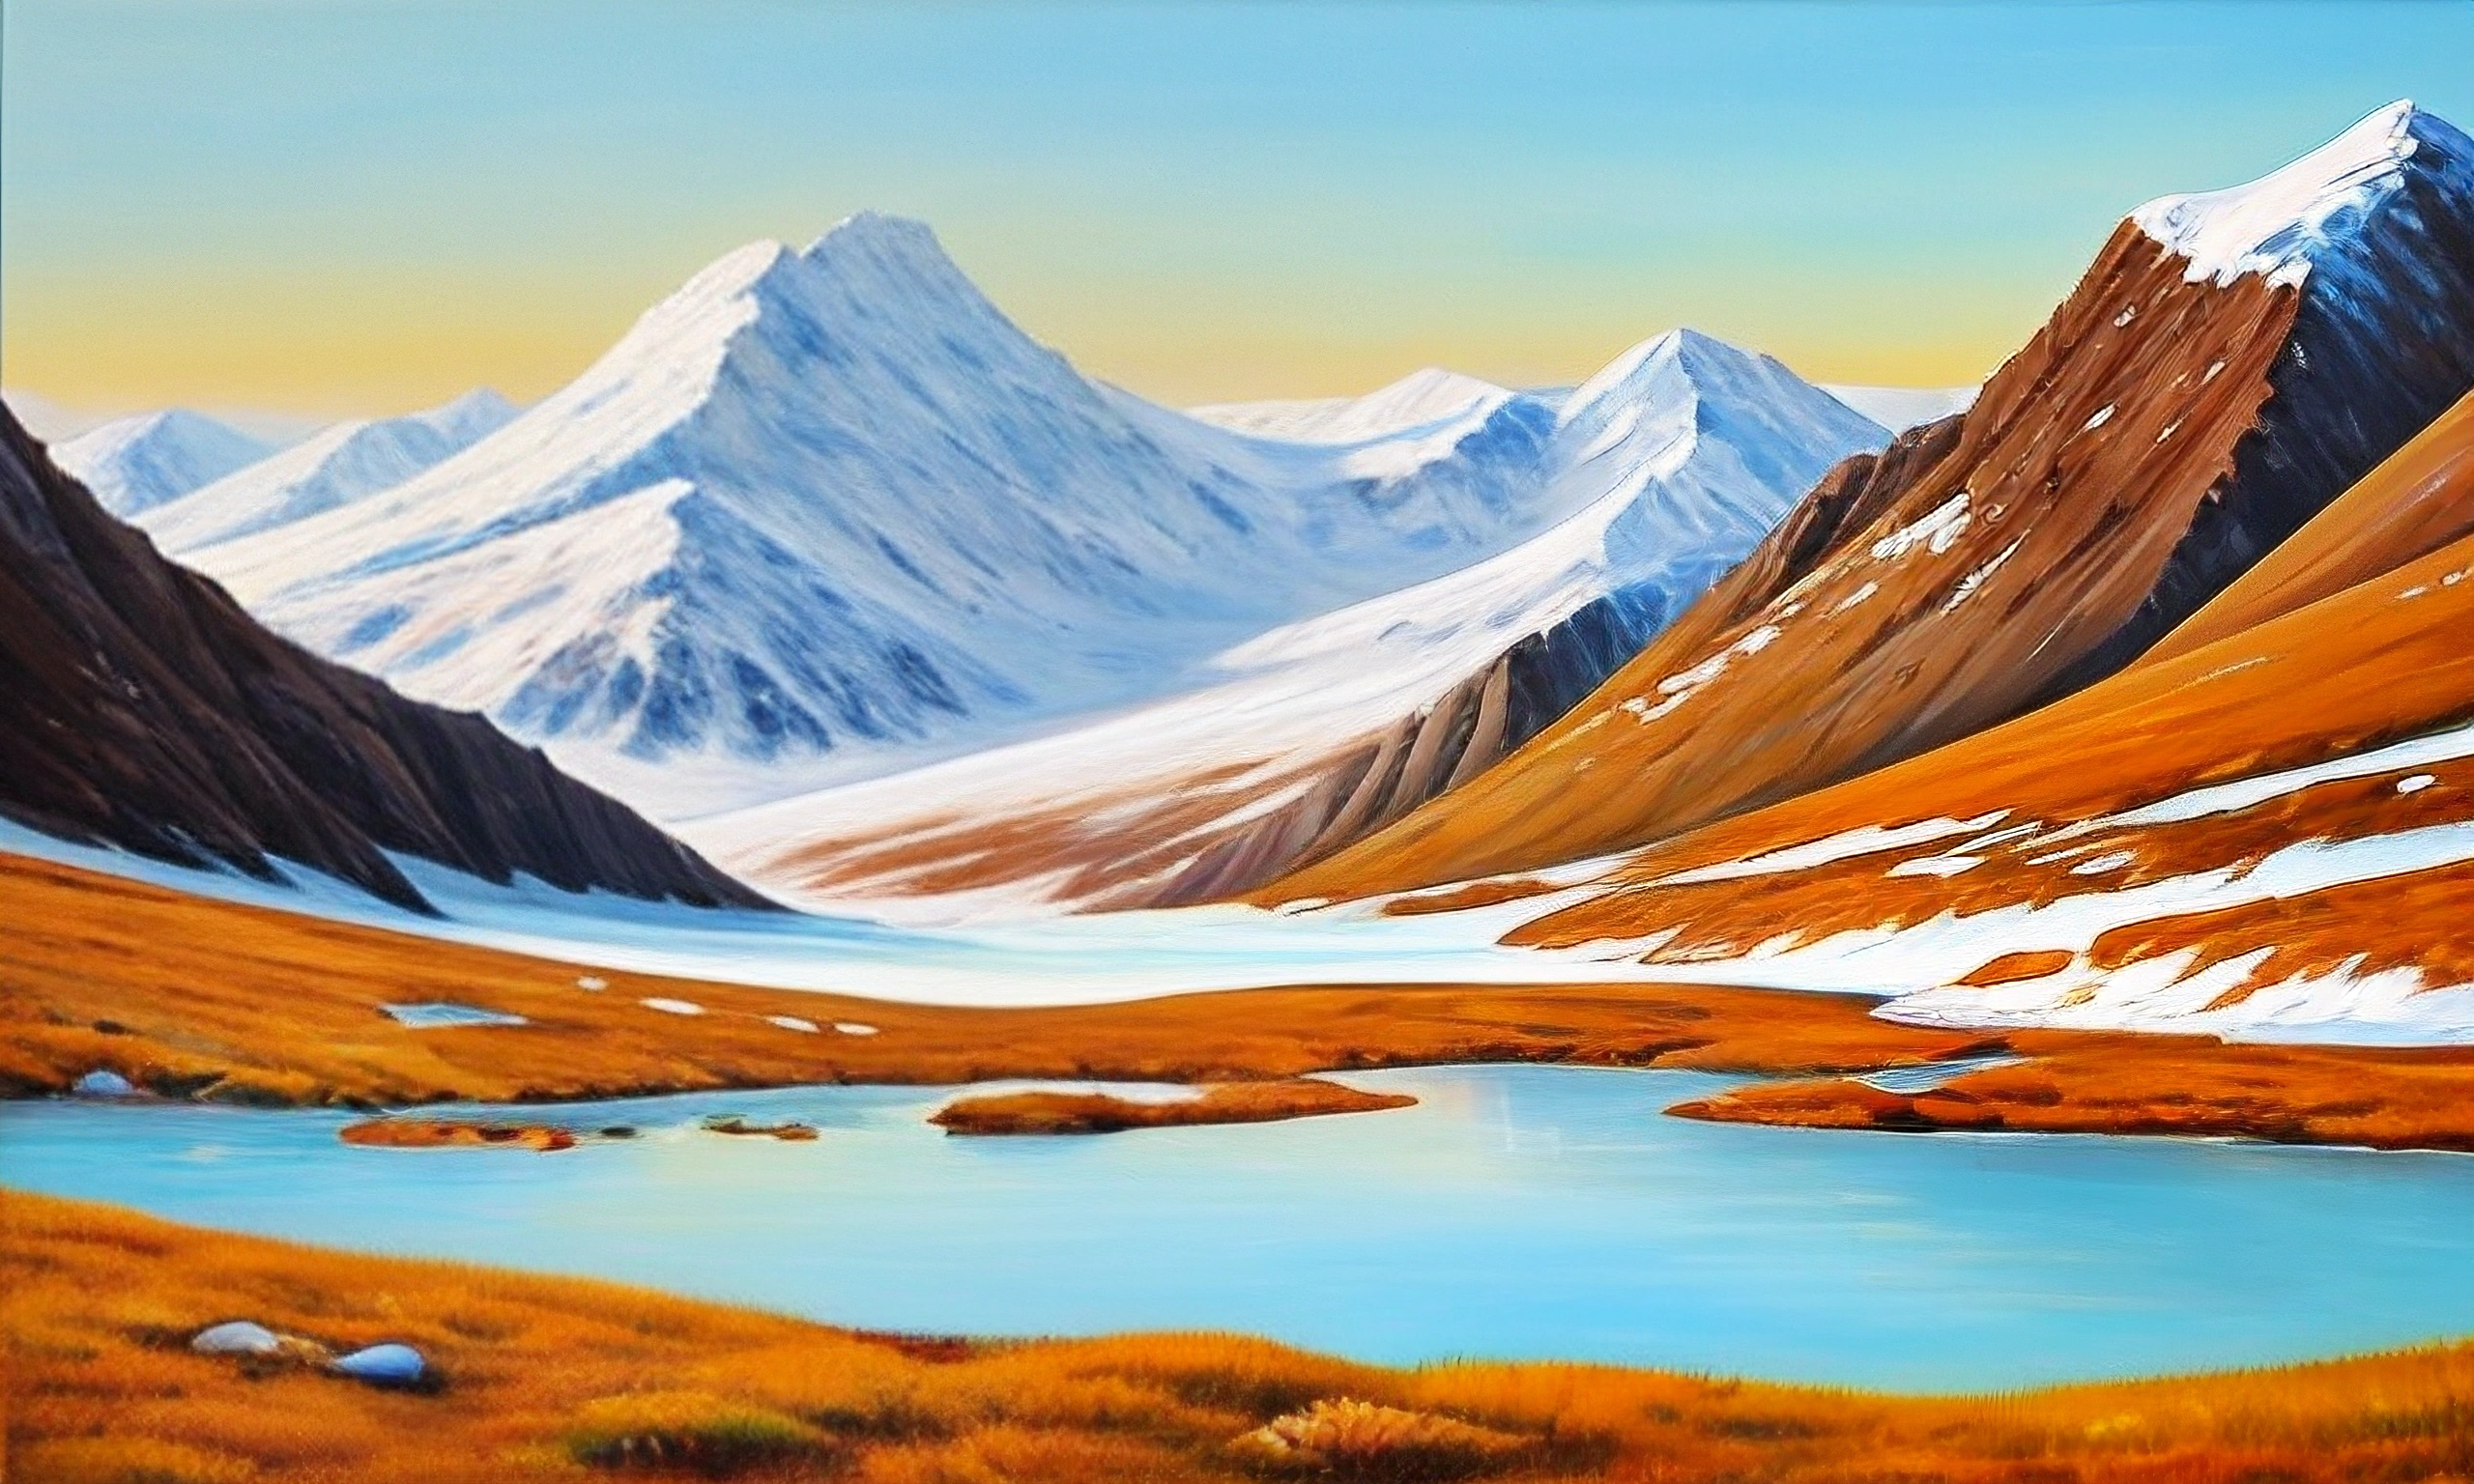 painting of a mountain landscape with a lake and snow covered mountains